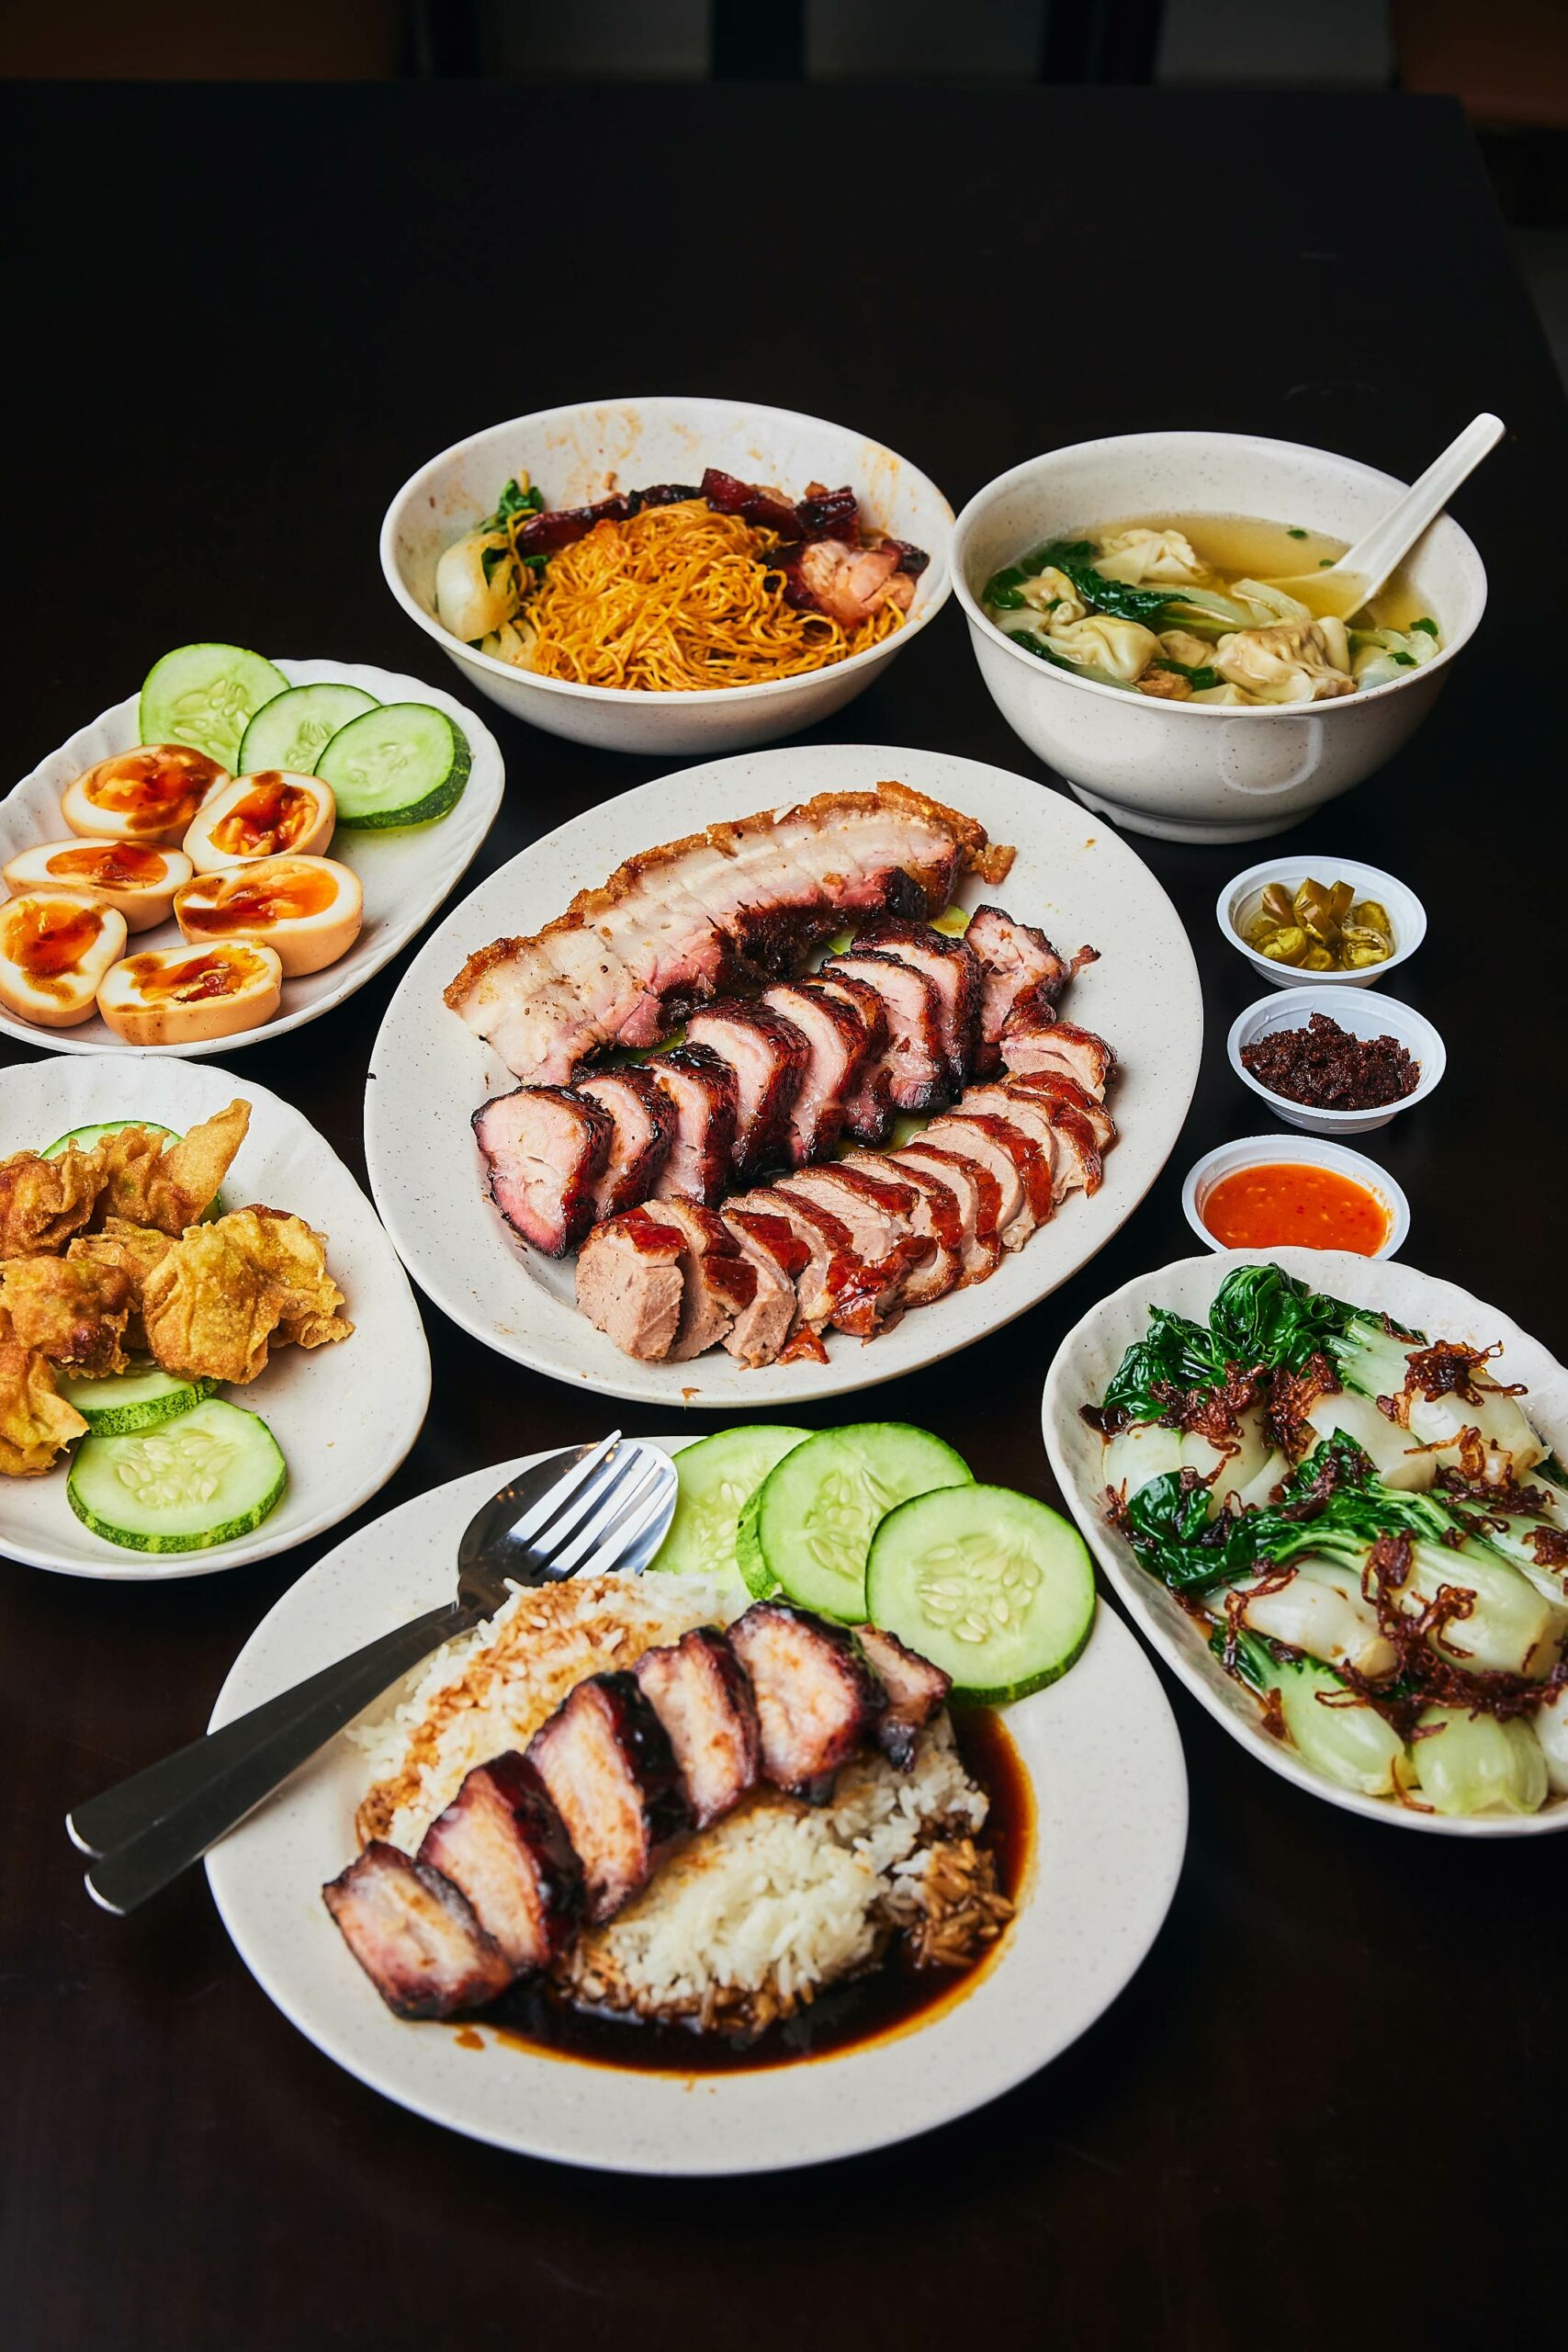 Rolex-wearing chef turned hawker who serves best char siew in S’pore opens restaurant in CBD